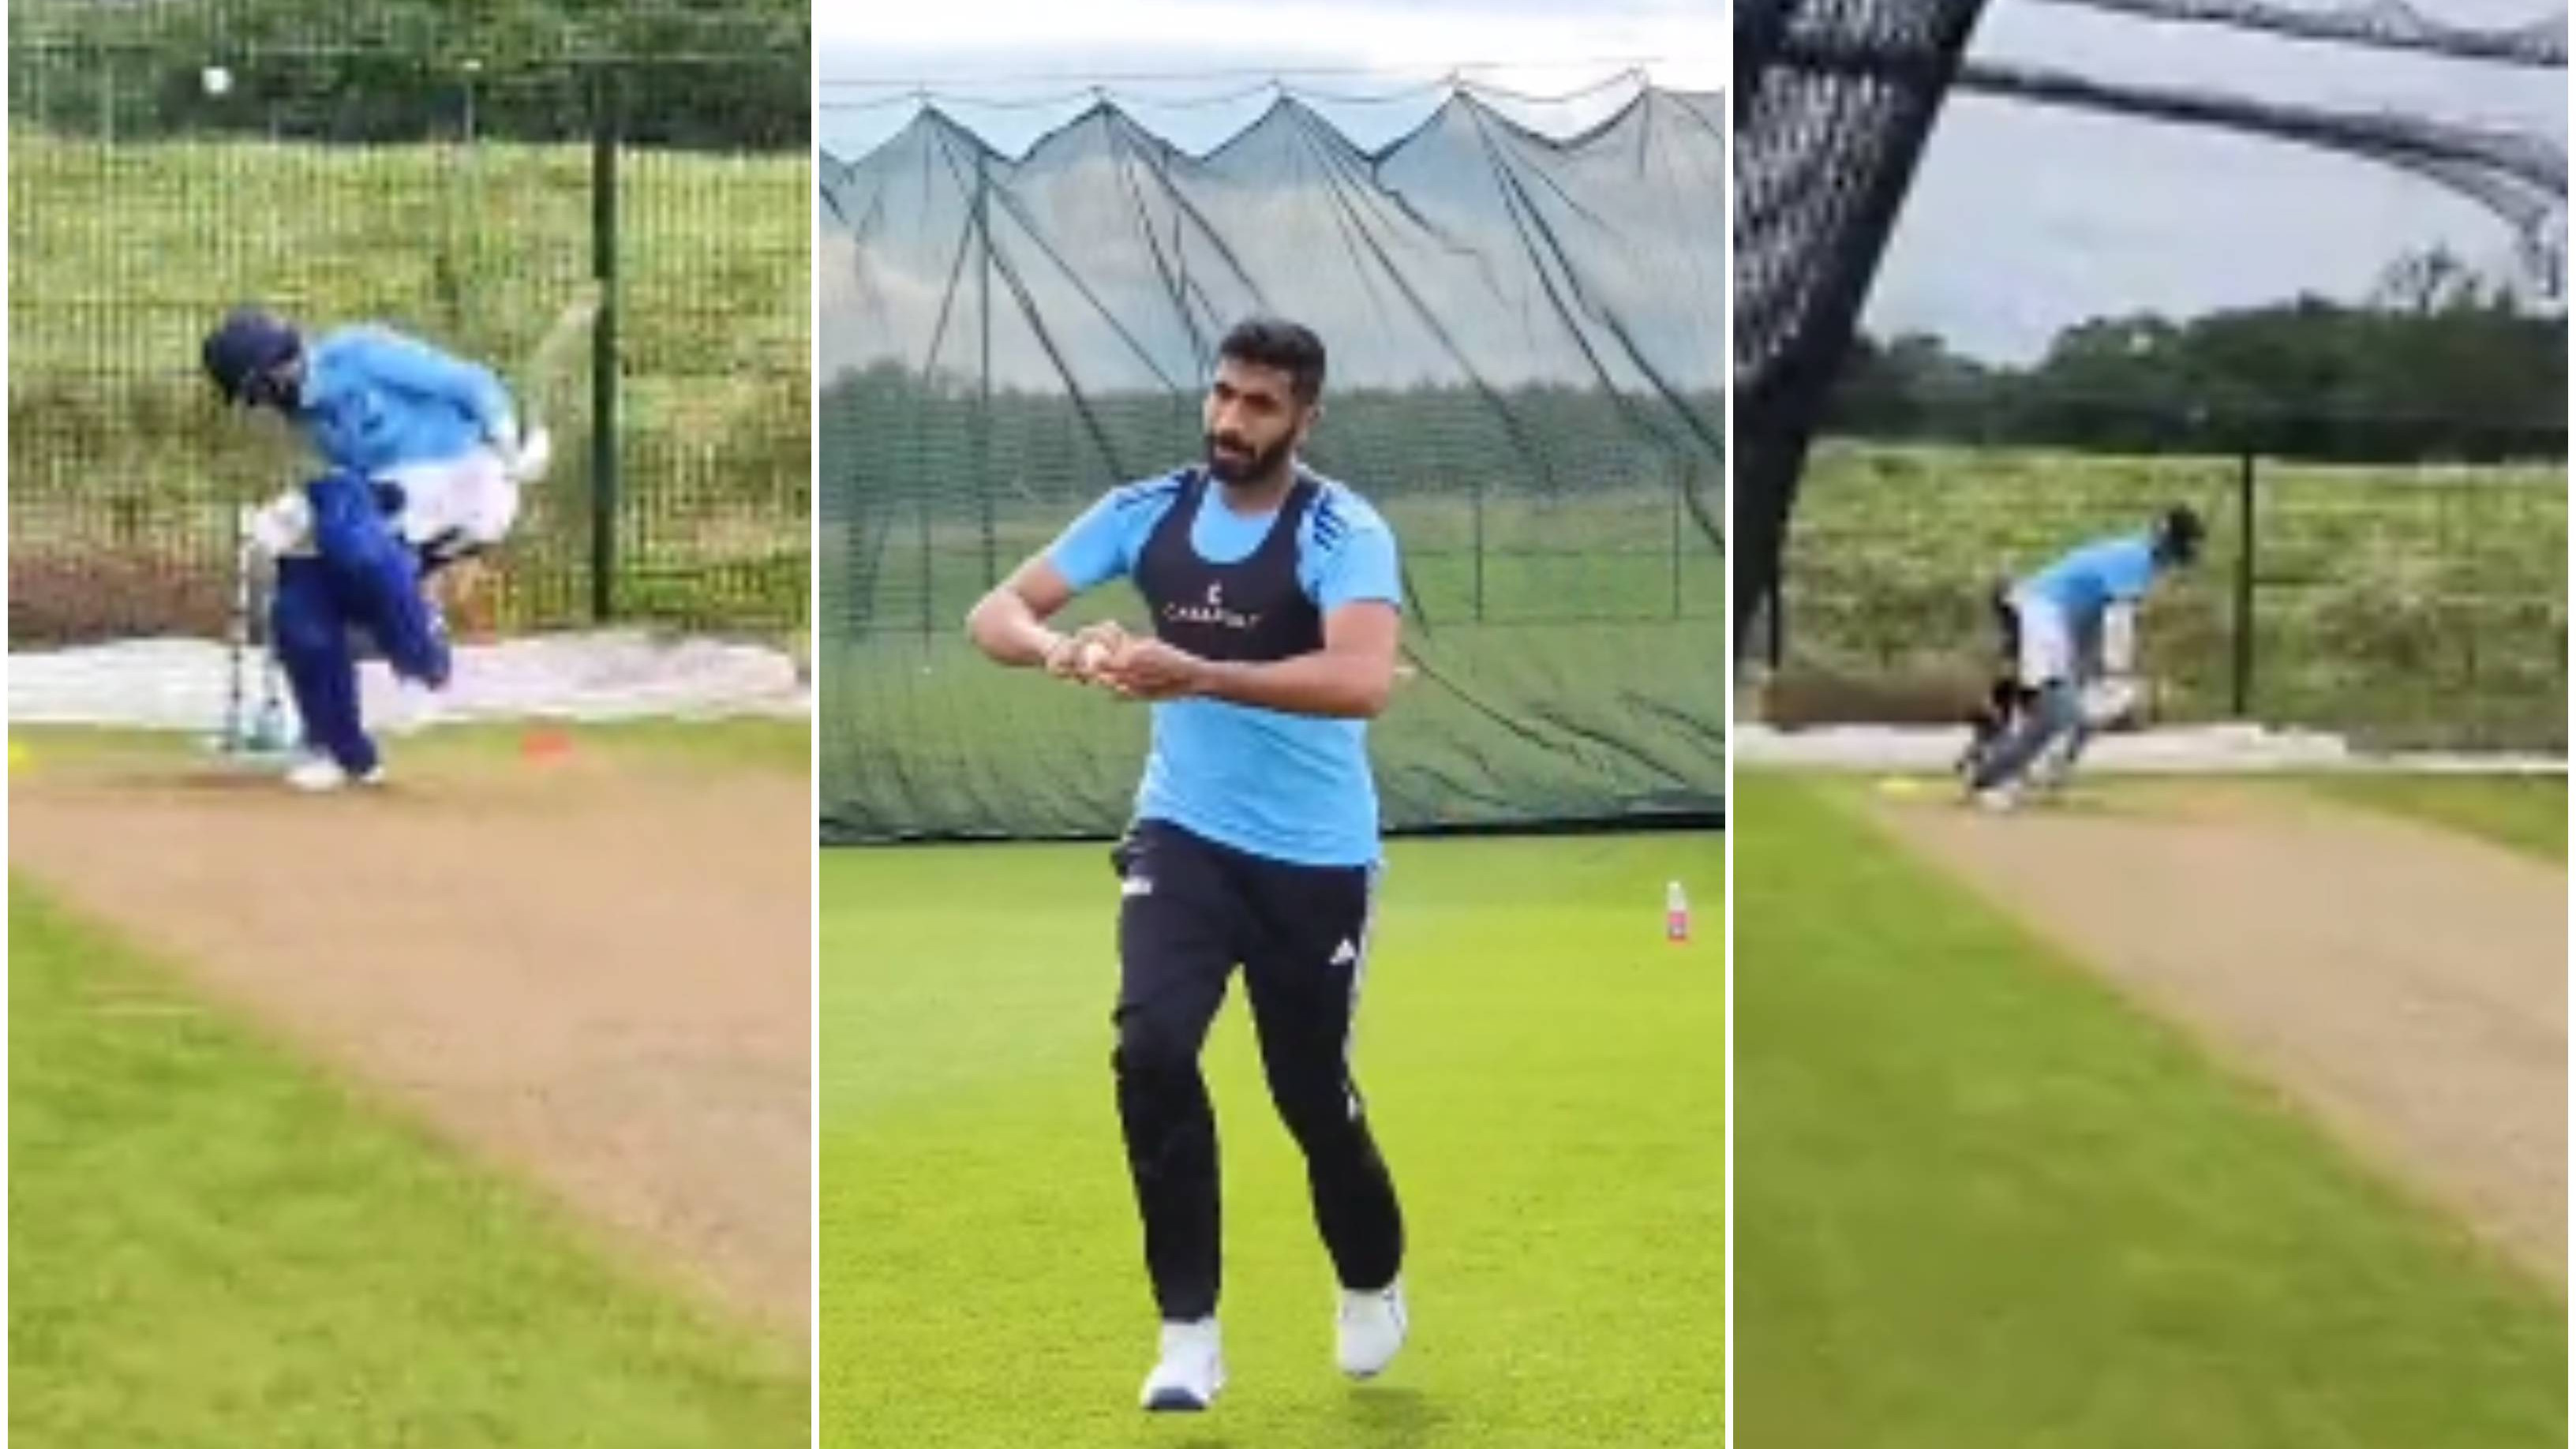 IRE v IND 2023: WATCH – Jasprit Bumrah bowls ferocious bouncer and toe-crushing yorker in nets ahead of 1st T20I